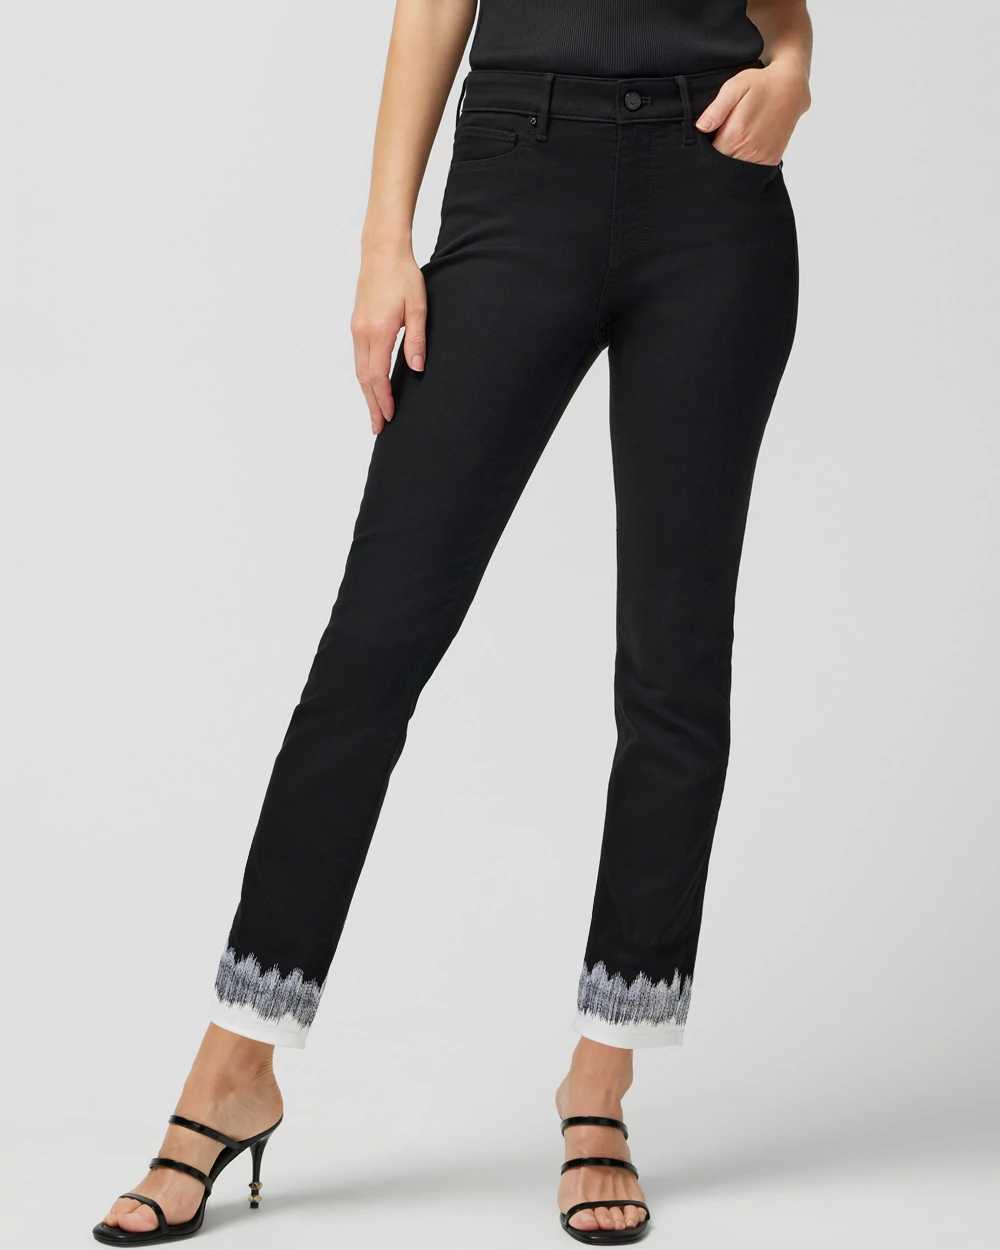 High-Rise Embroidered Cuff Slim Crop Jeans click to view larger image.